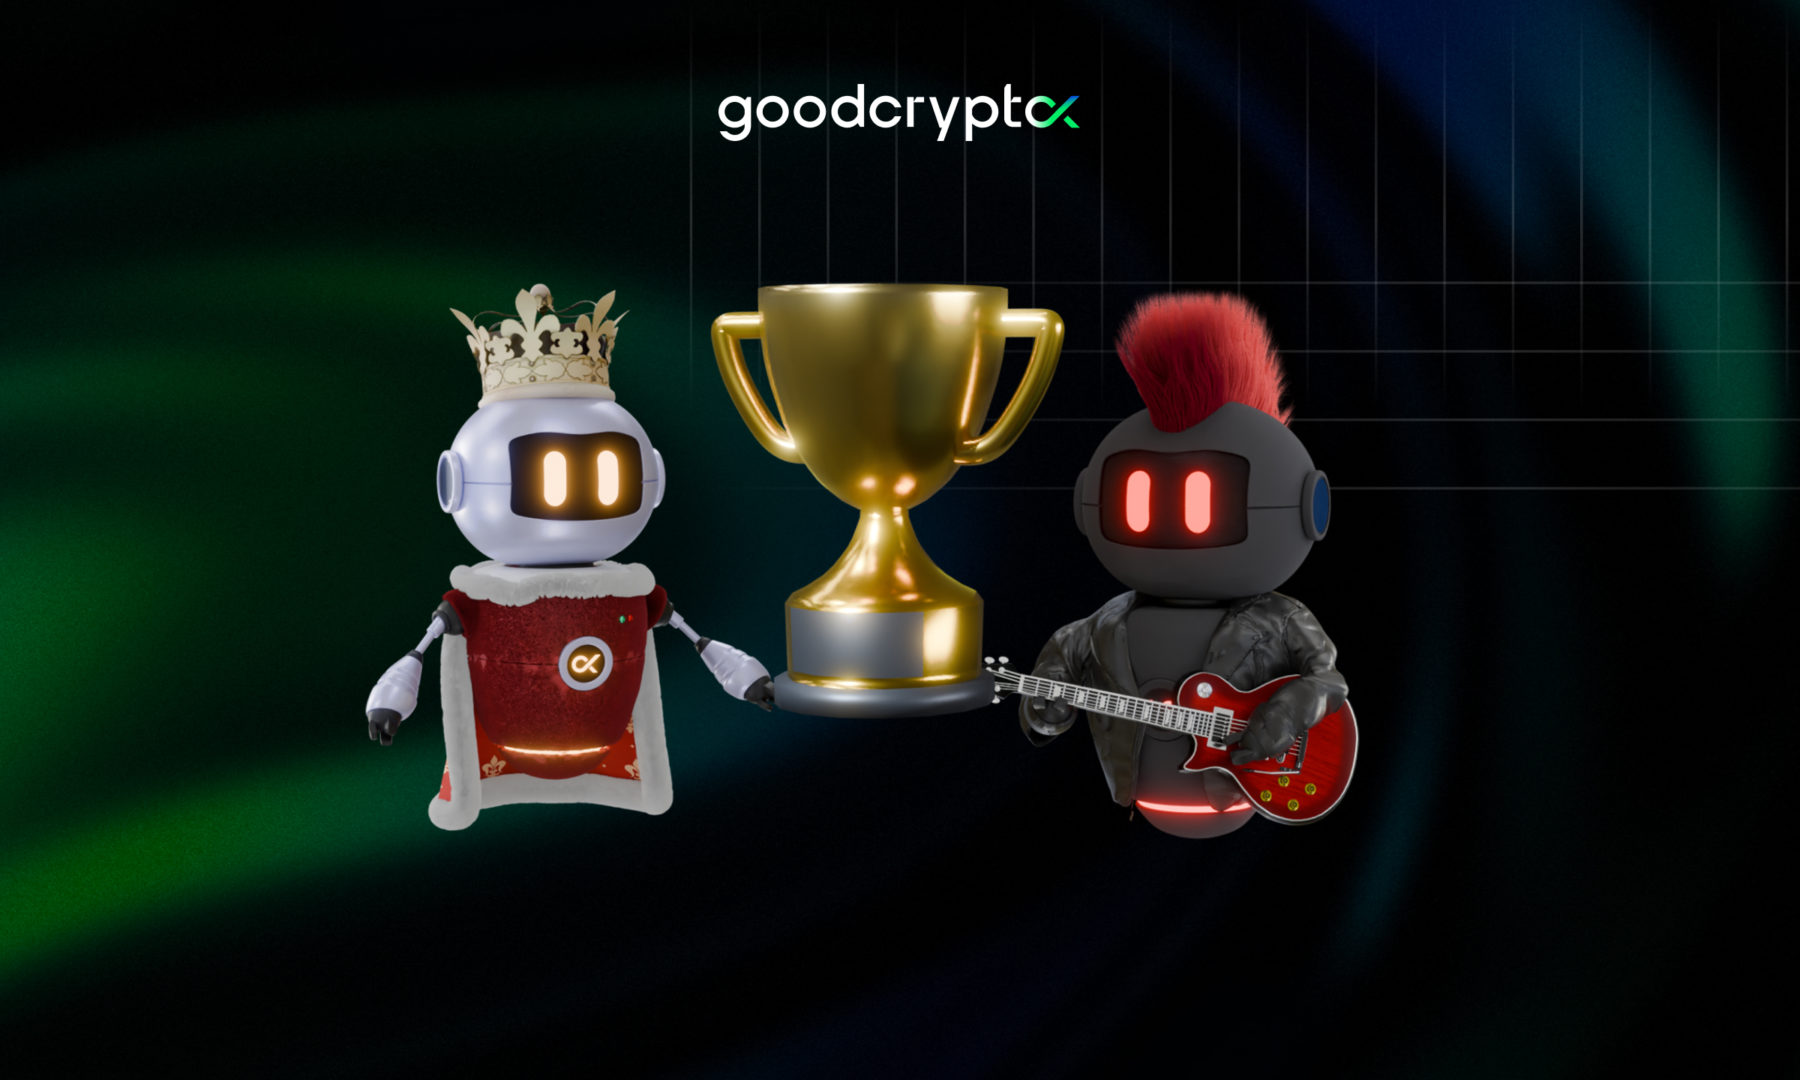 goodcryptoX king and rock star nfts